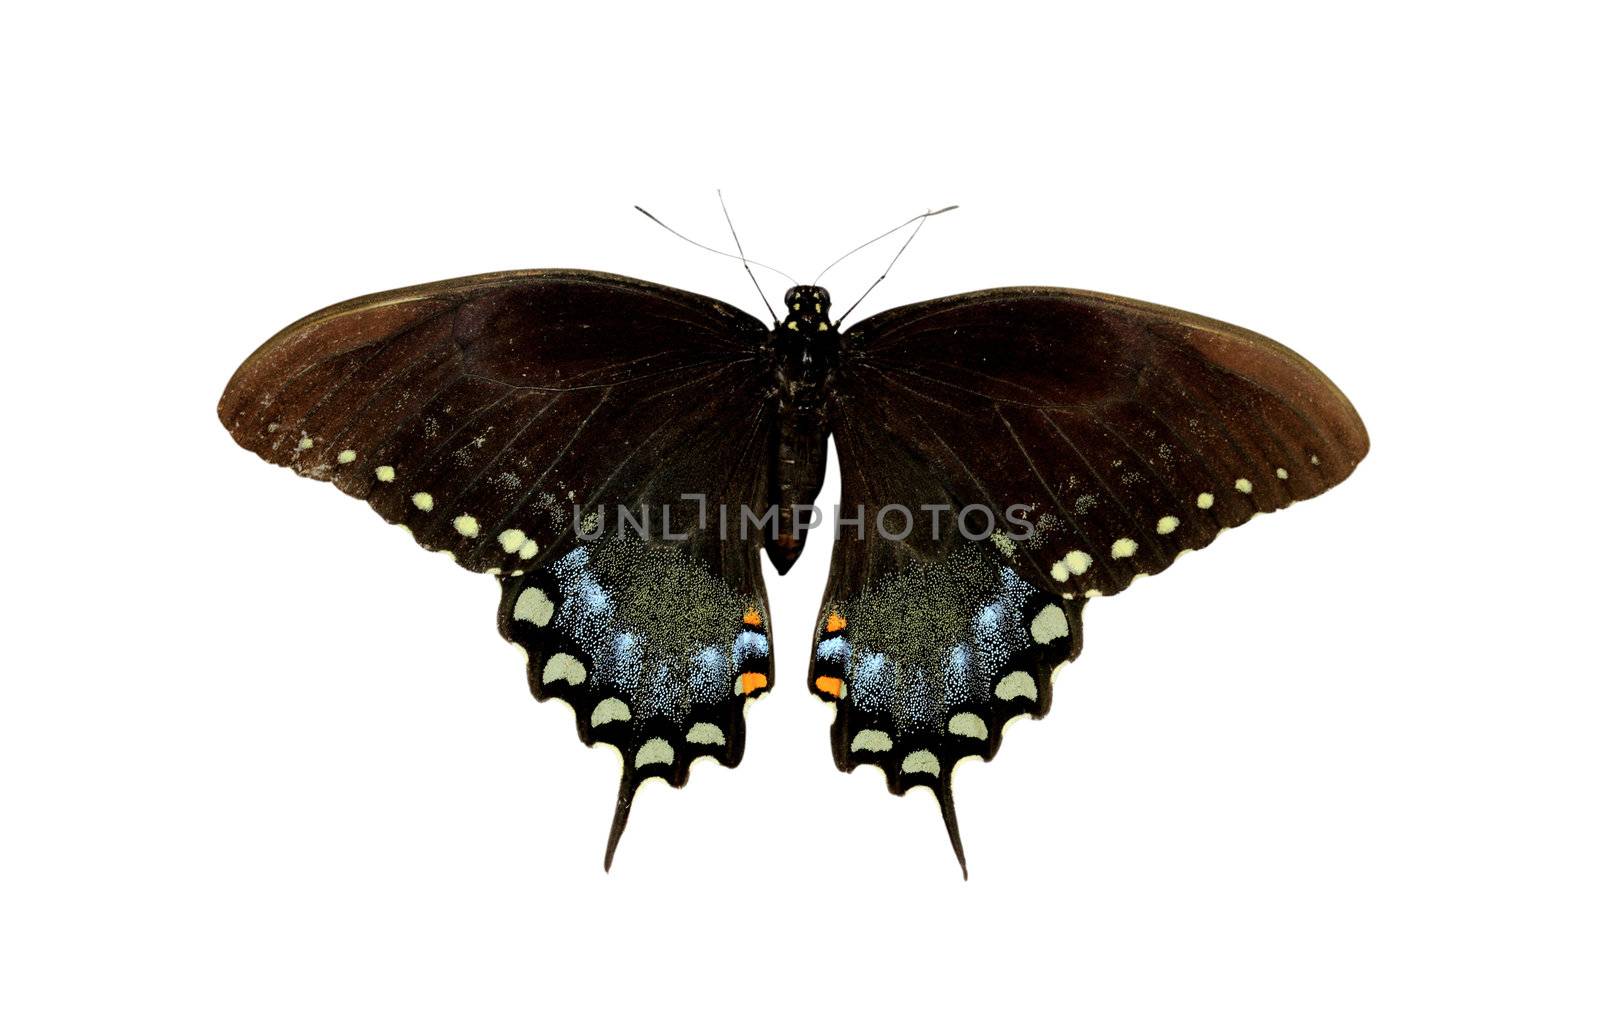 Spicebush Swallowtail butterfly isolated on white with clipping path.